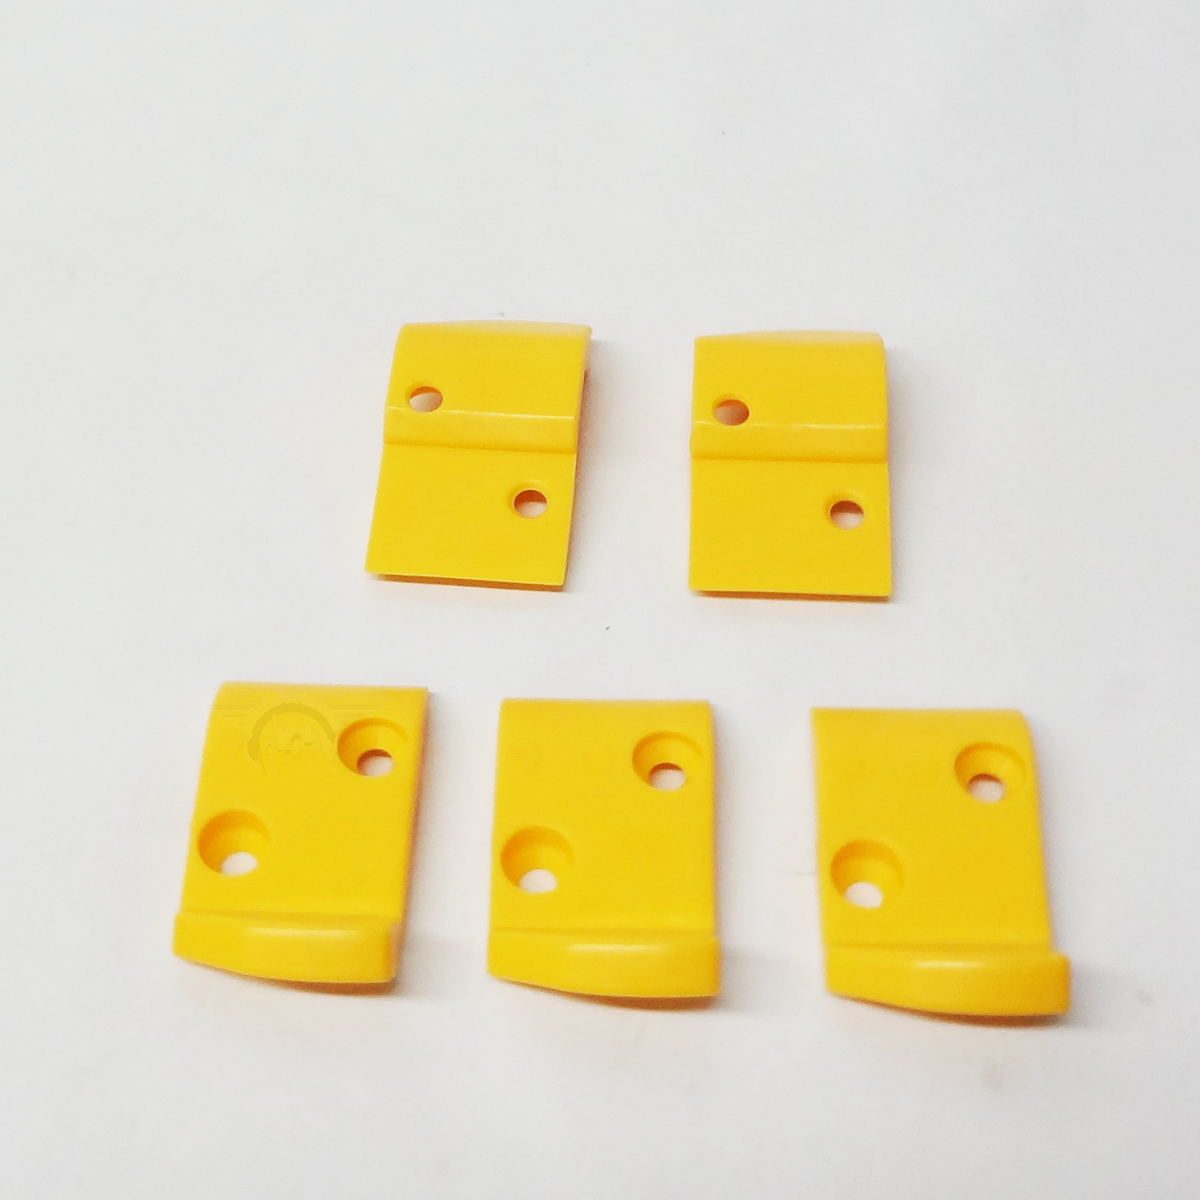 EBTOOLS 5 Pairs Tire Changer Leverless Inserts Plastic Protectors Yellow Guard 